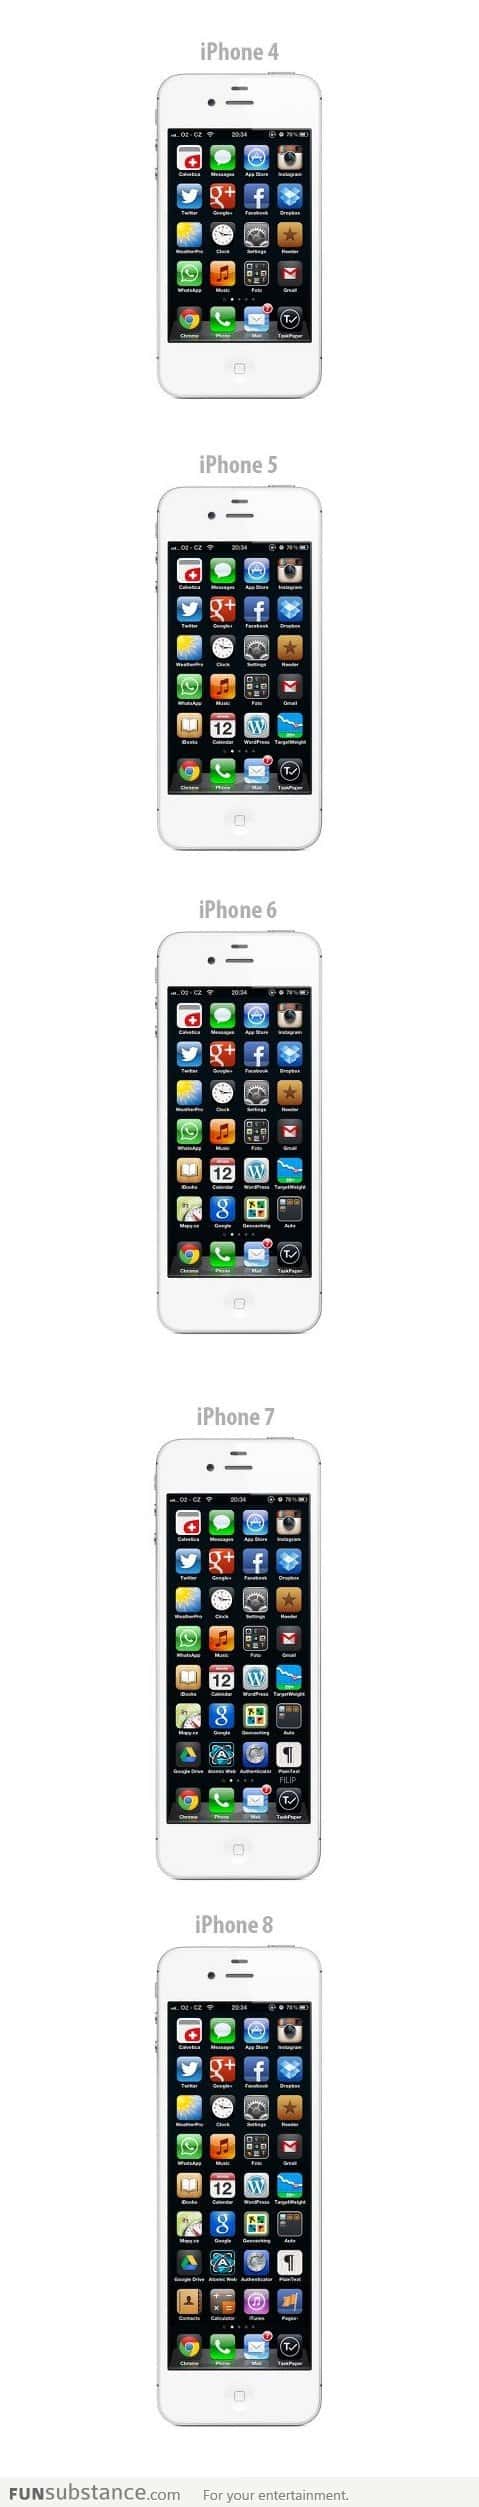 The new iPhone 5